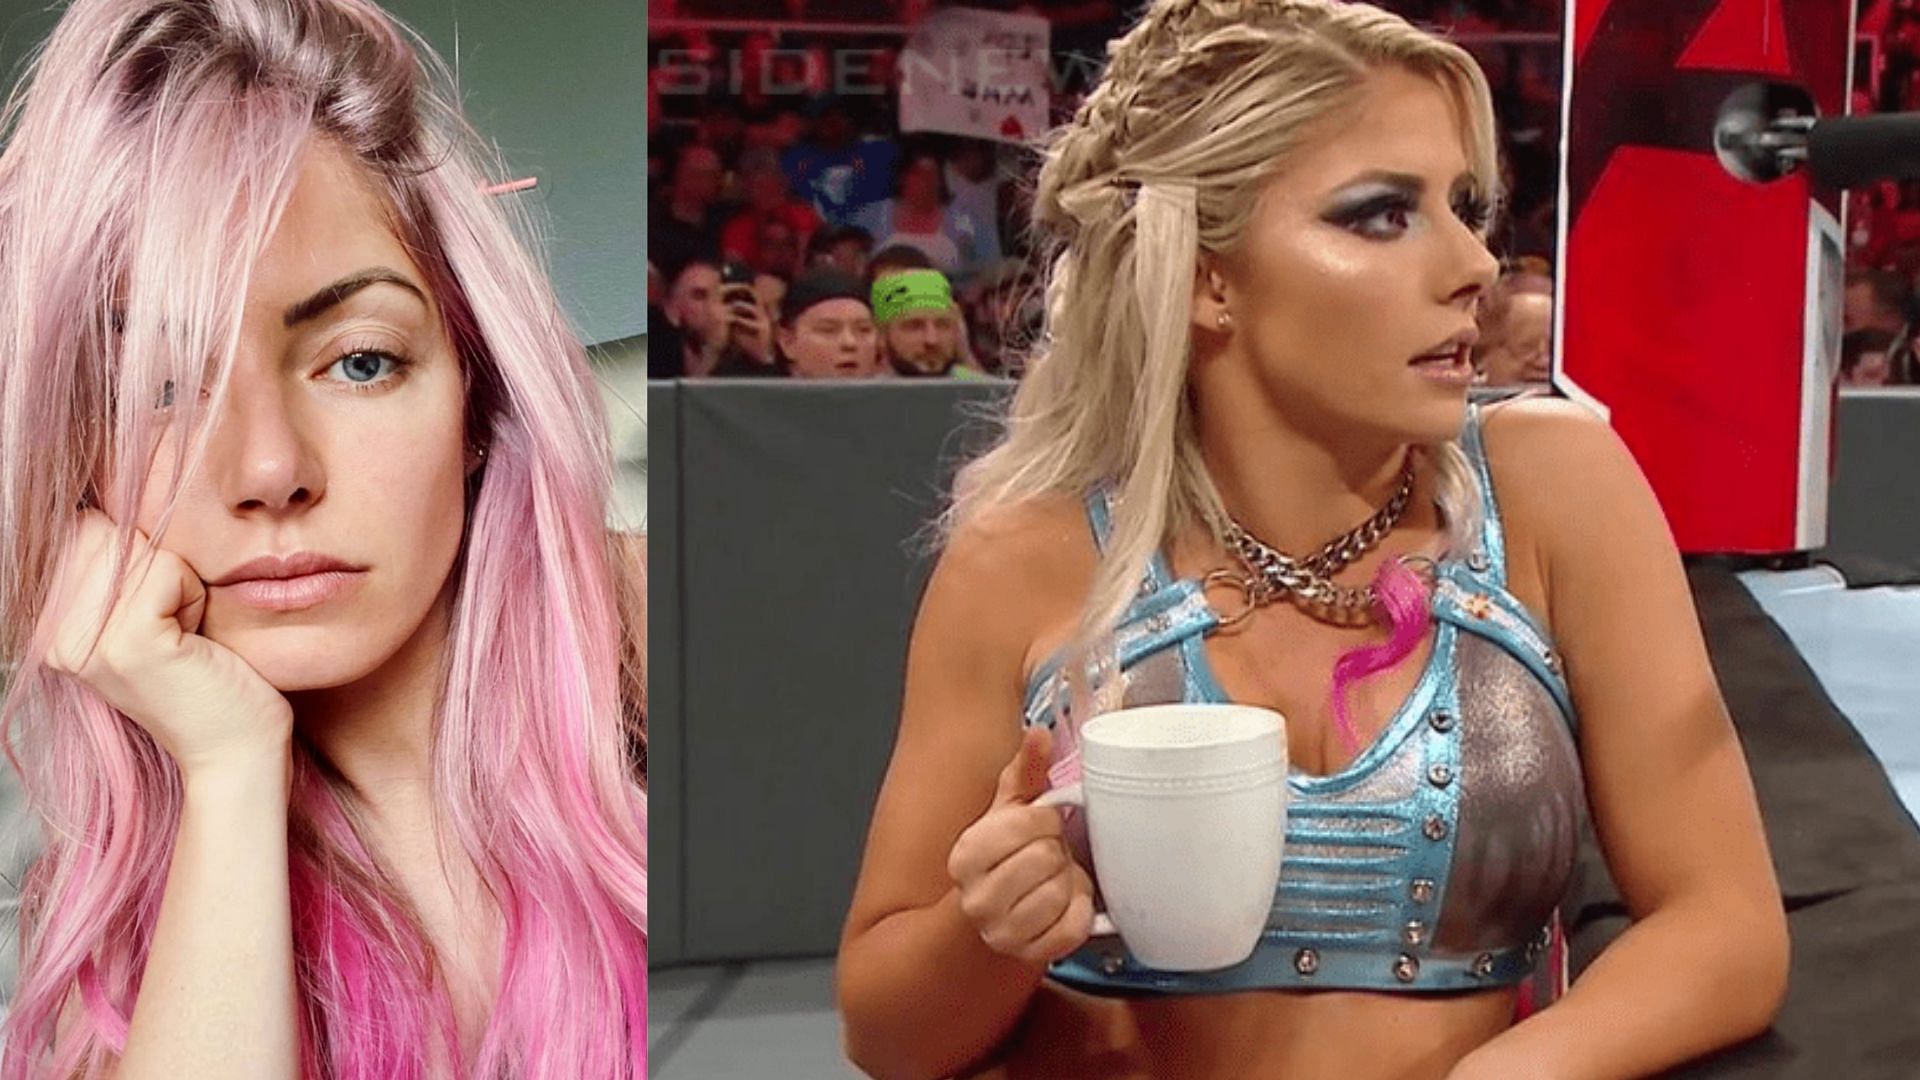 Alexa Bliss is not on WWE TV at the moment.